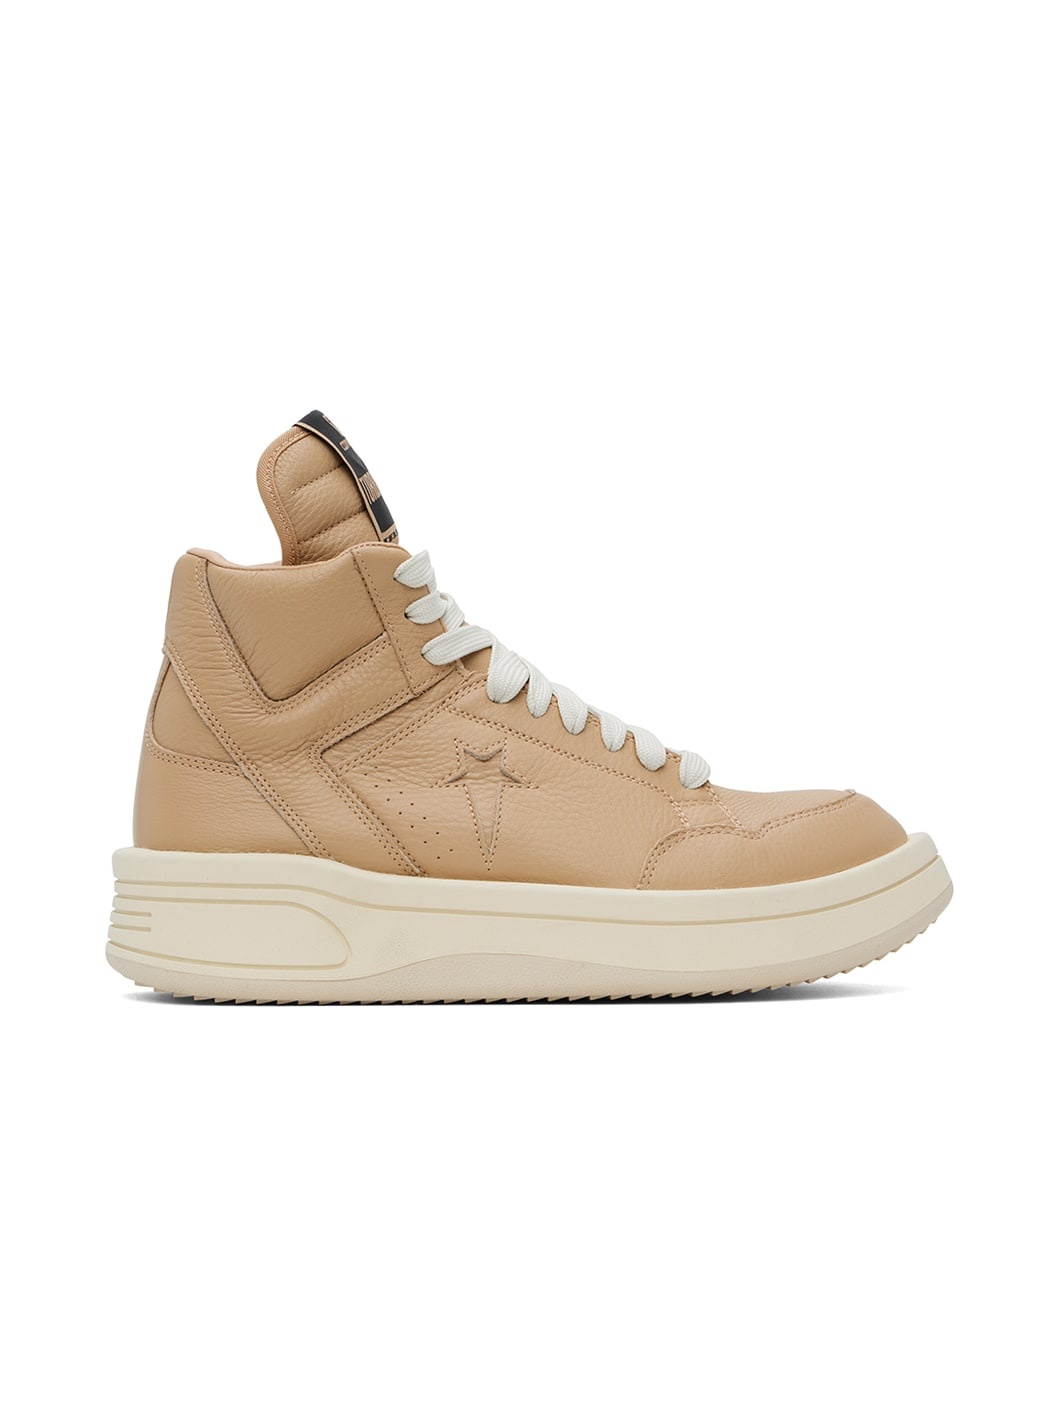 Tan Converse Edition TURBOWPN Mid Sneakers - 1